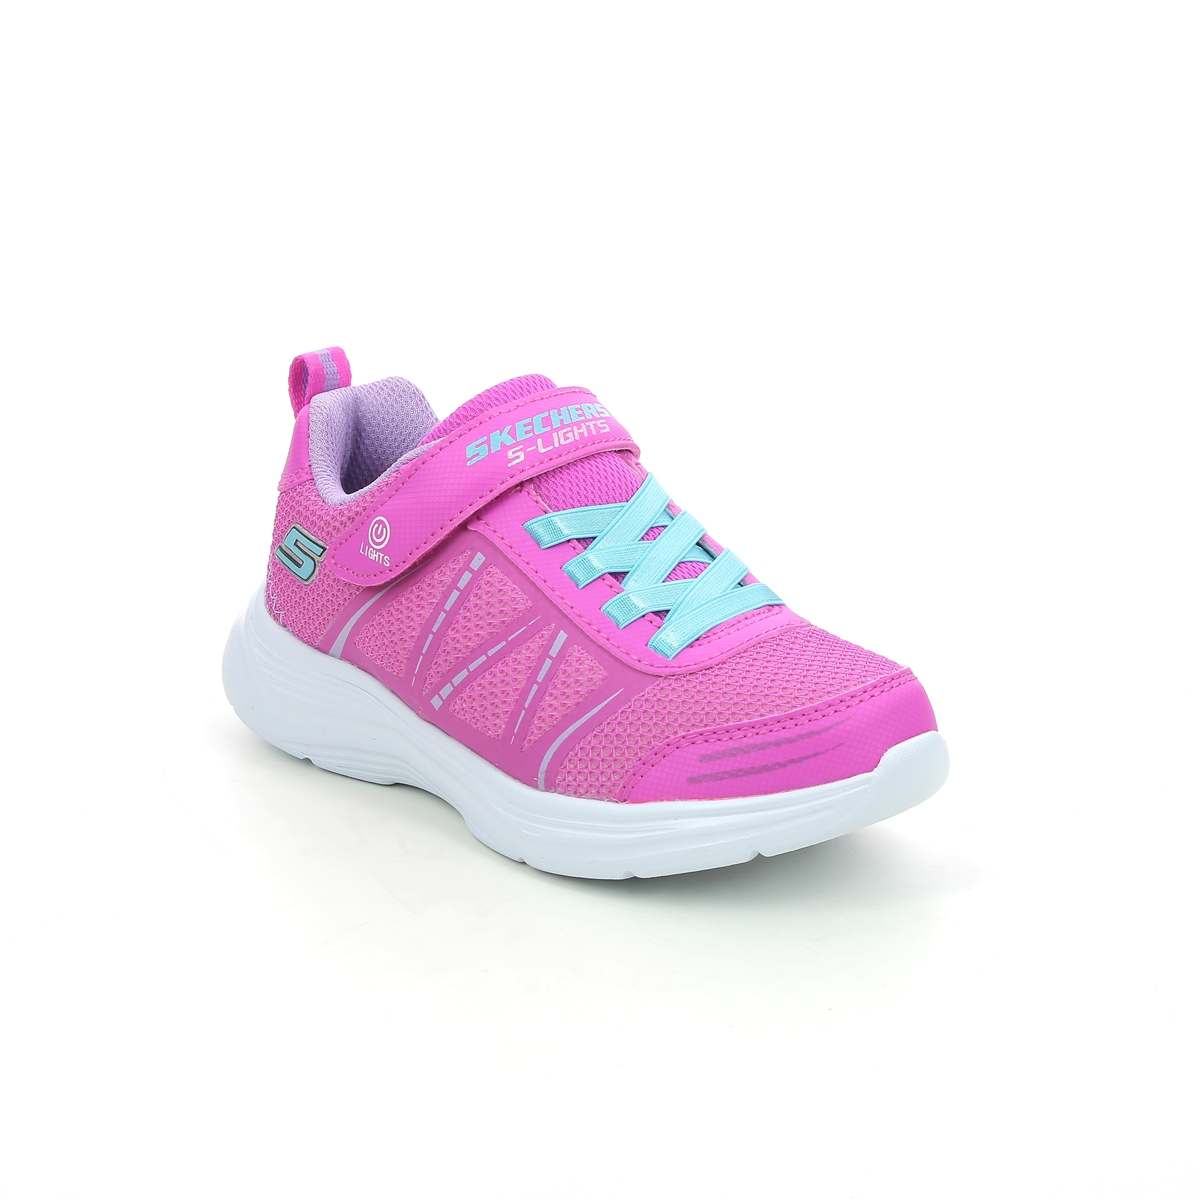 Skechers Glimmer Kicks HTPK Hot Pink Kids girls trainers 302302L in a Plain Textile in Size 31